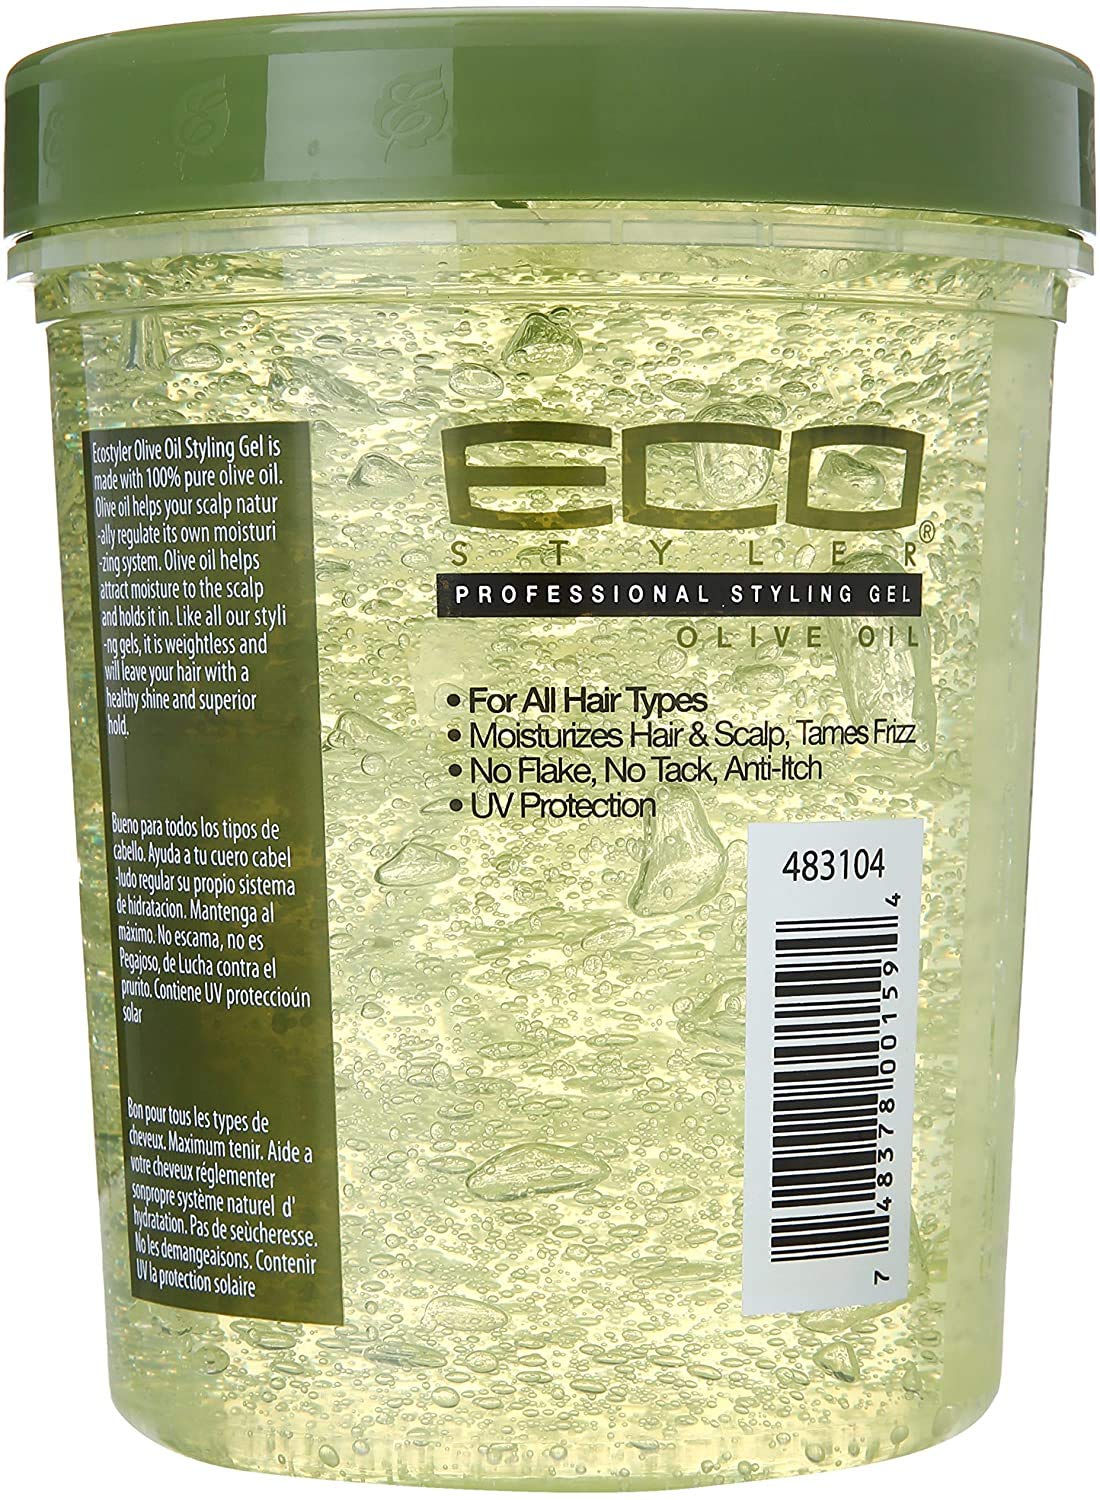 Ecostyler Professional Styling Gel with Olive Oil 32 oz